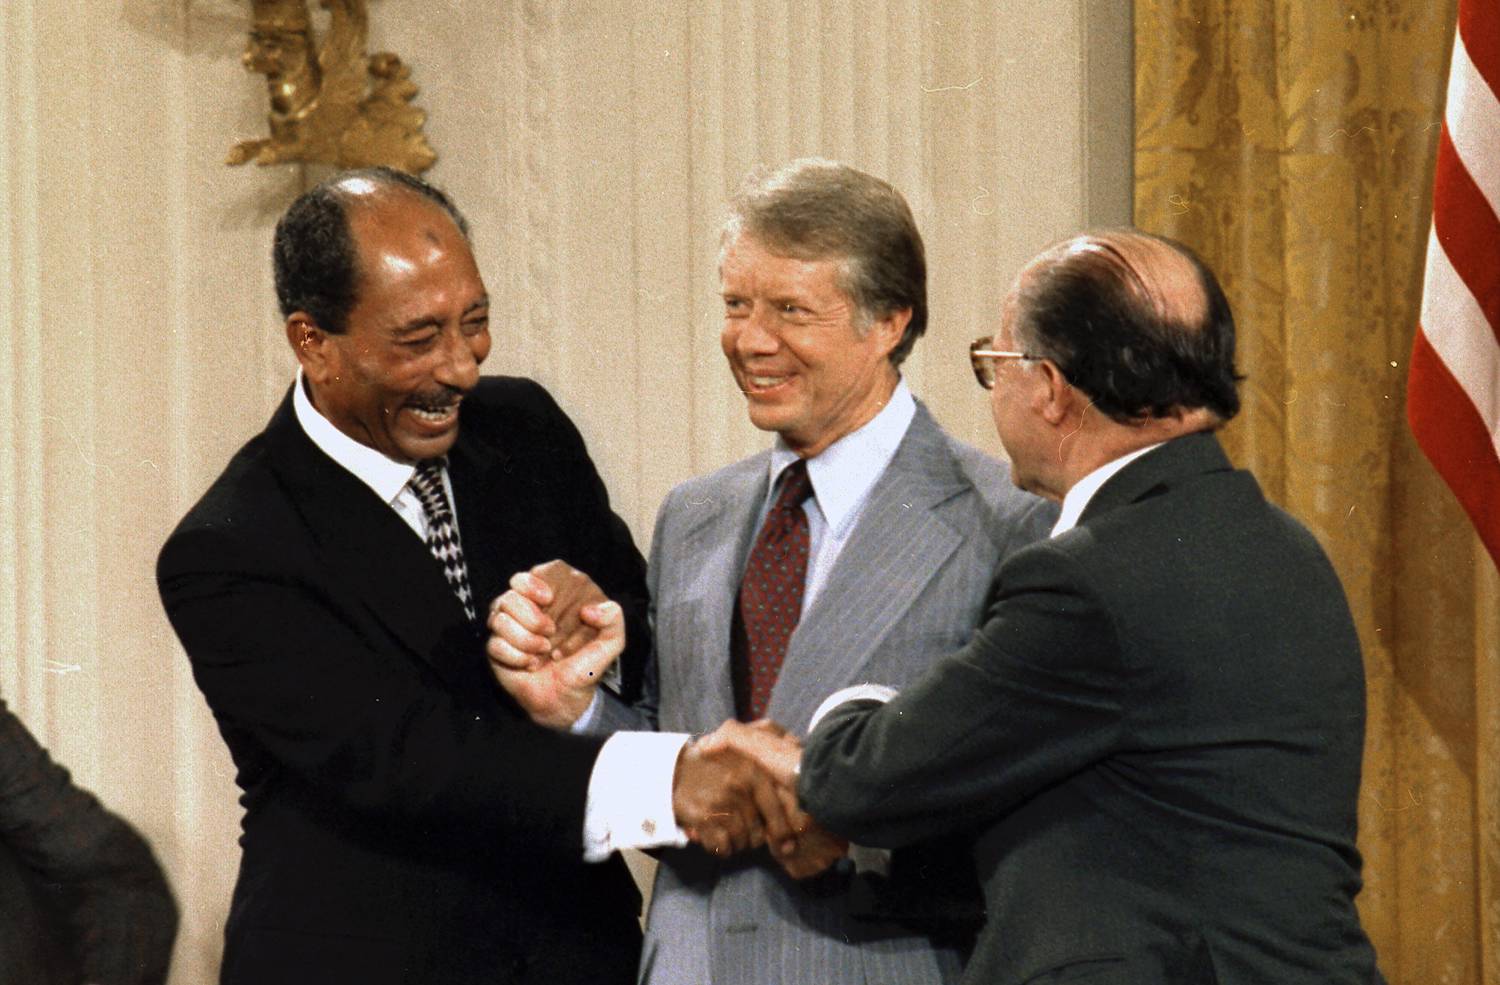 Egyptian President Anwar Sadat, U.S. President Jimmy Carter, and Israeli Prime Minister Menachem Begin shake hands at the conclusion of the Camp David Peace Accords signing ceremony. Photo: US National Archives and Records Administration CC